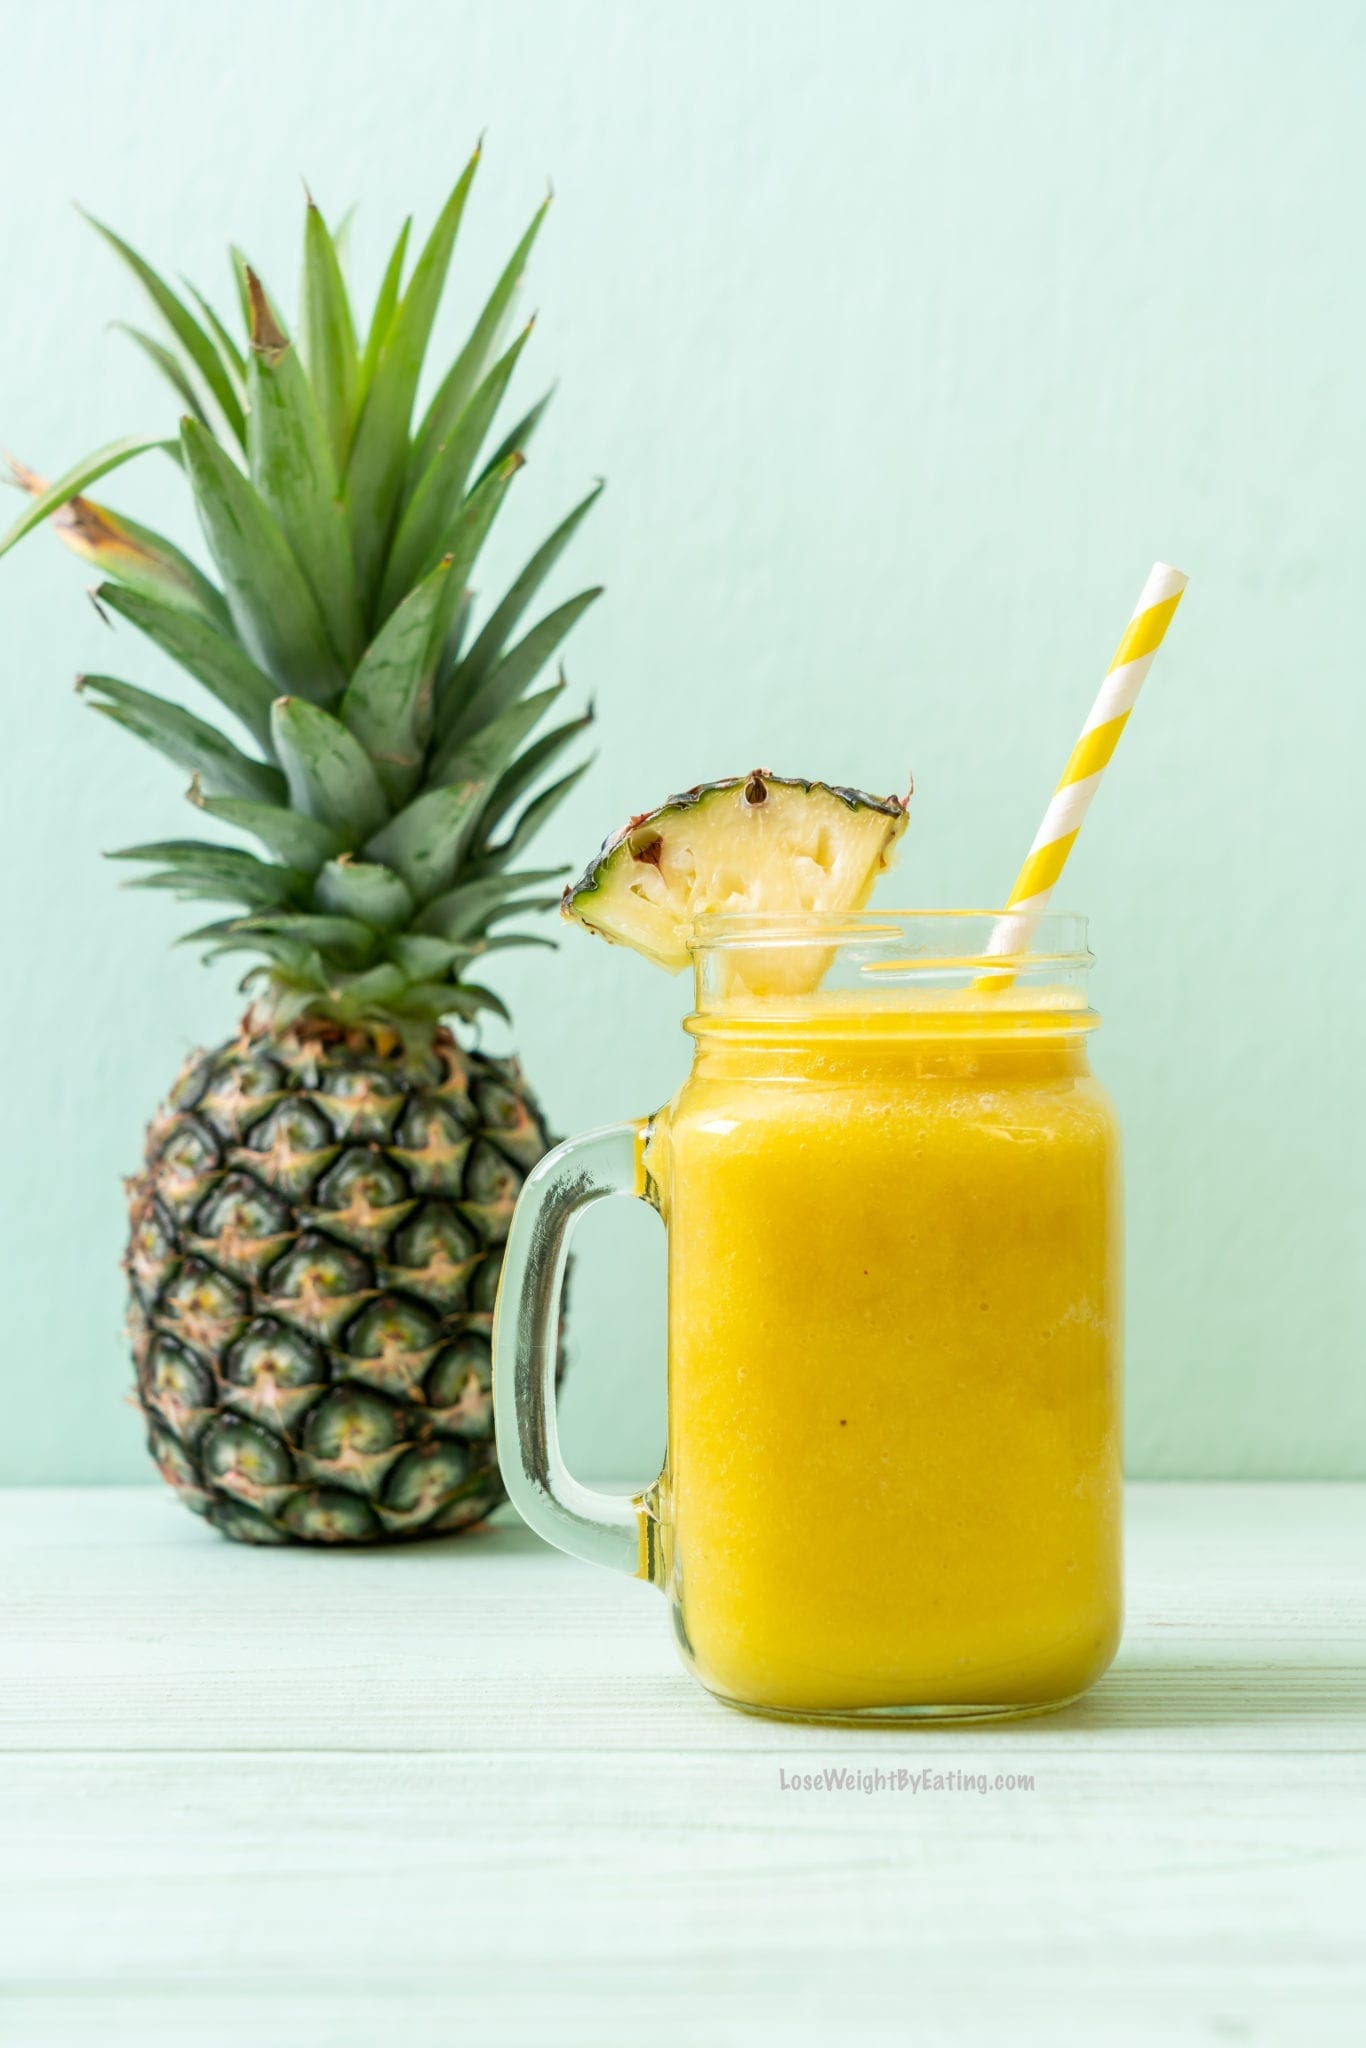 Healthy Pineapple Smoothie for Weight Loss - Lose Weight By Eating